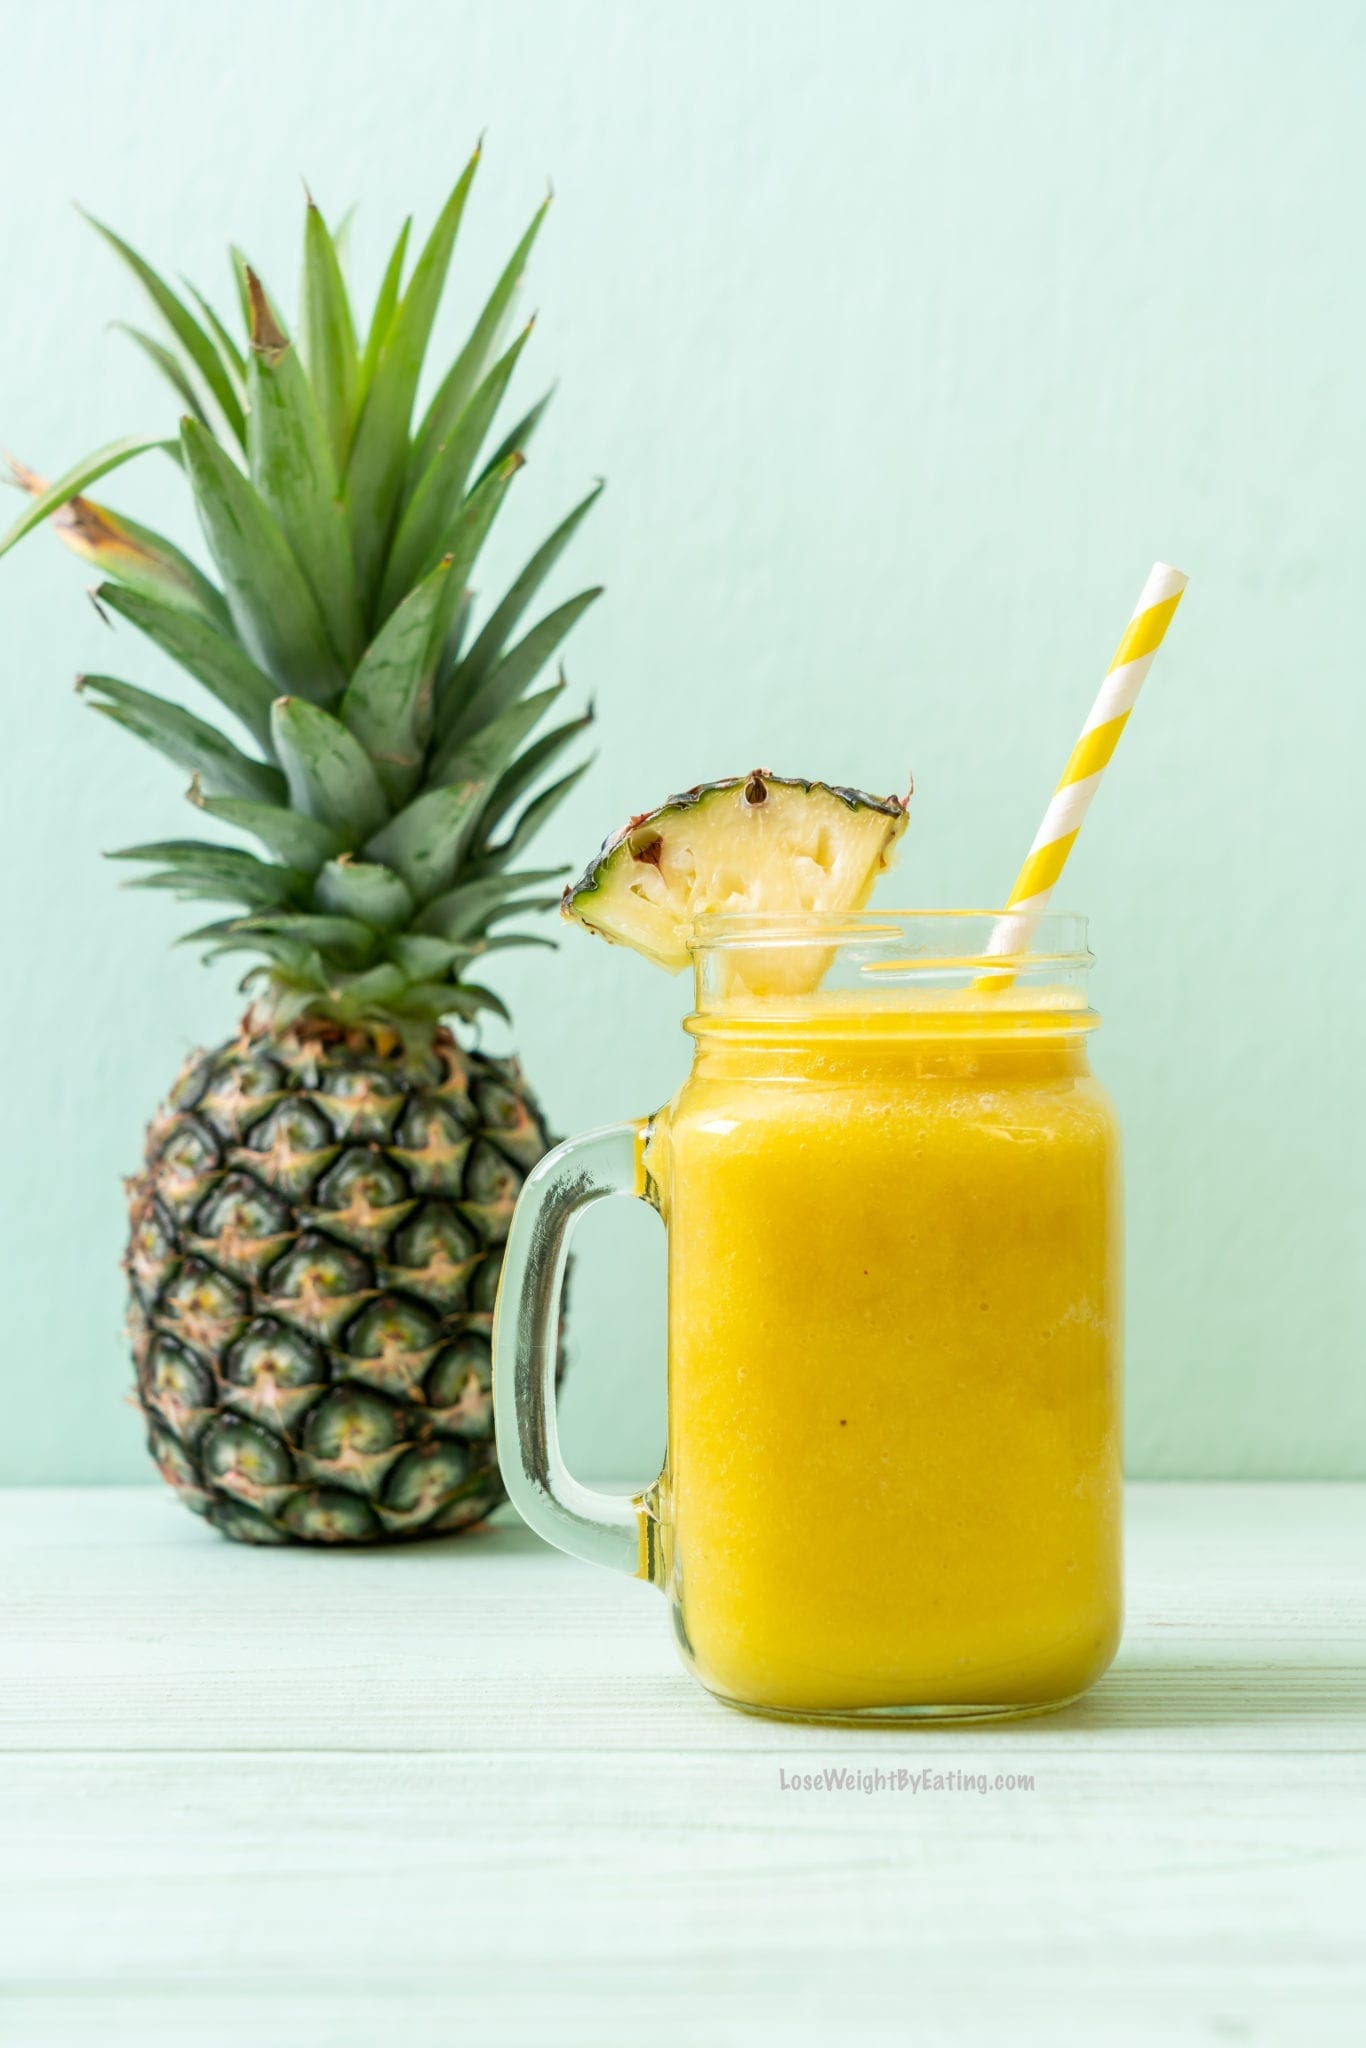 Healthy Pineapple Smoothie for Weight Loss - Lose Weight By Eating